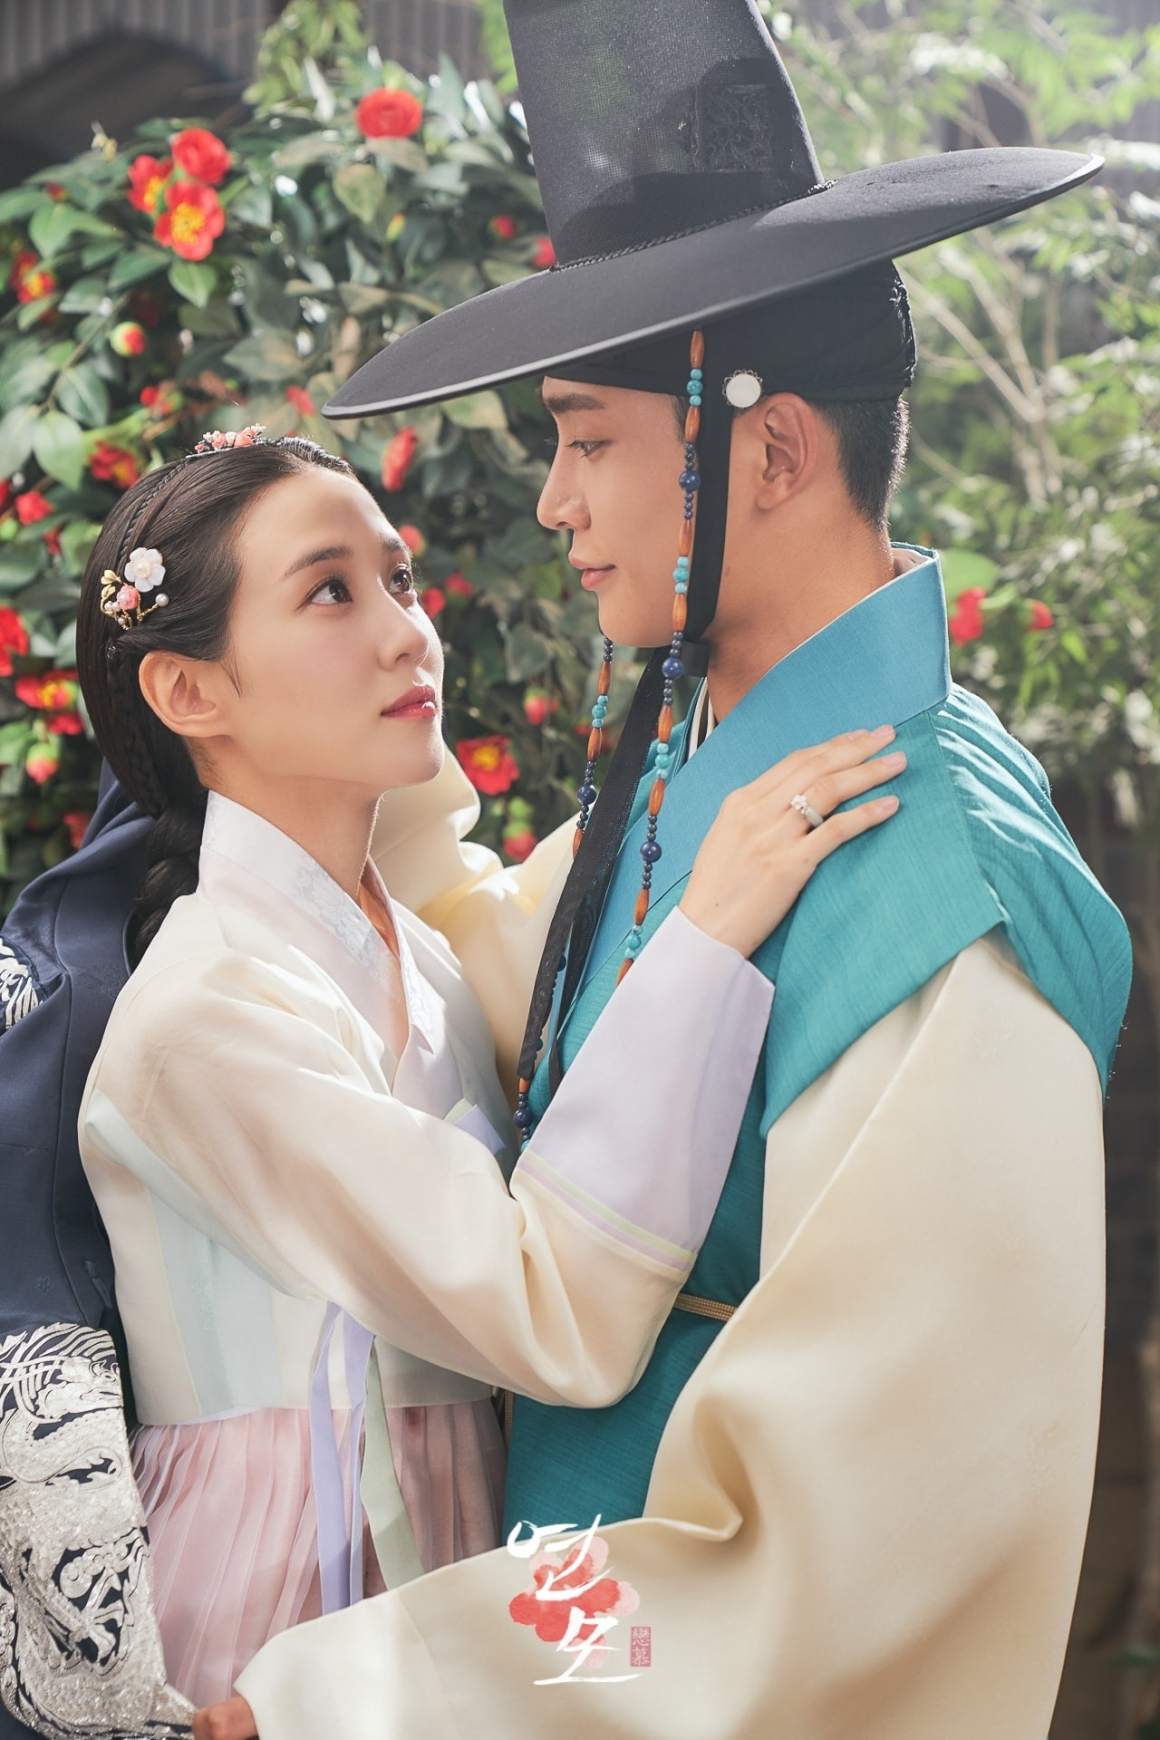 The King's Affection” Shares New Sneak Peek Of SF9's Rowoon And Park Eun Bin's Chemistry Flixadda